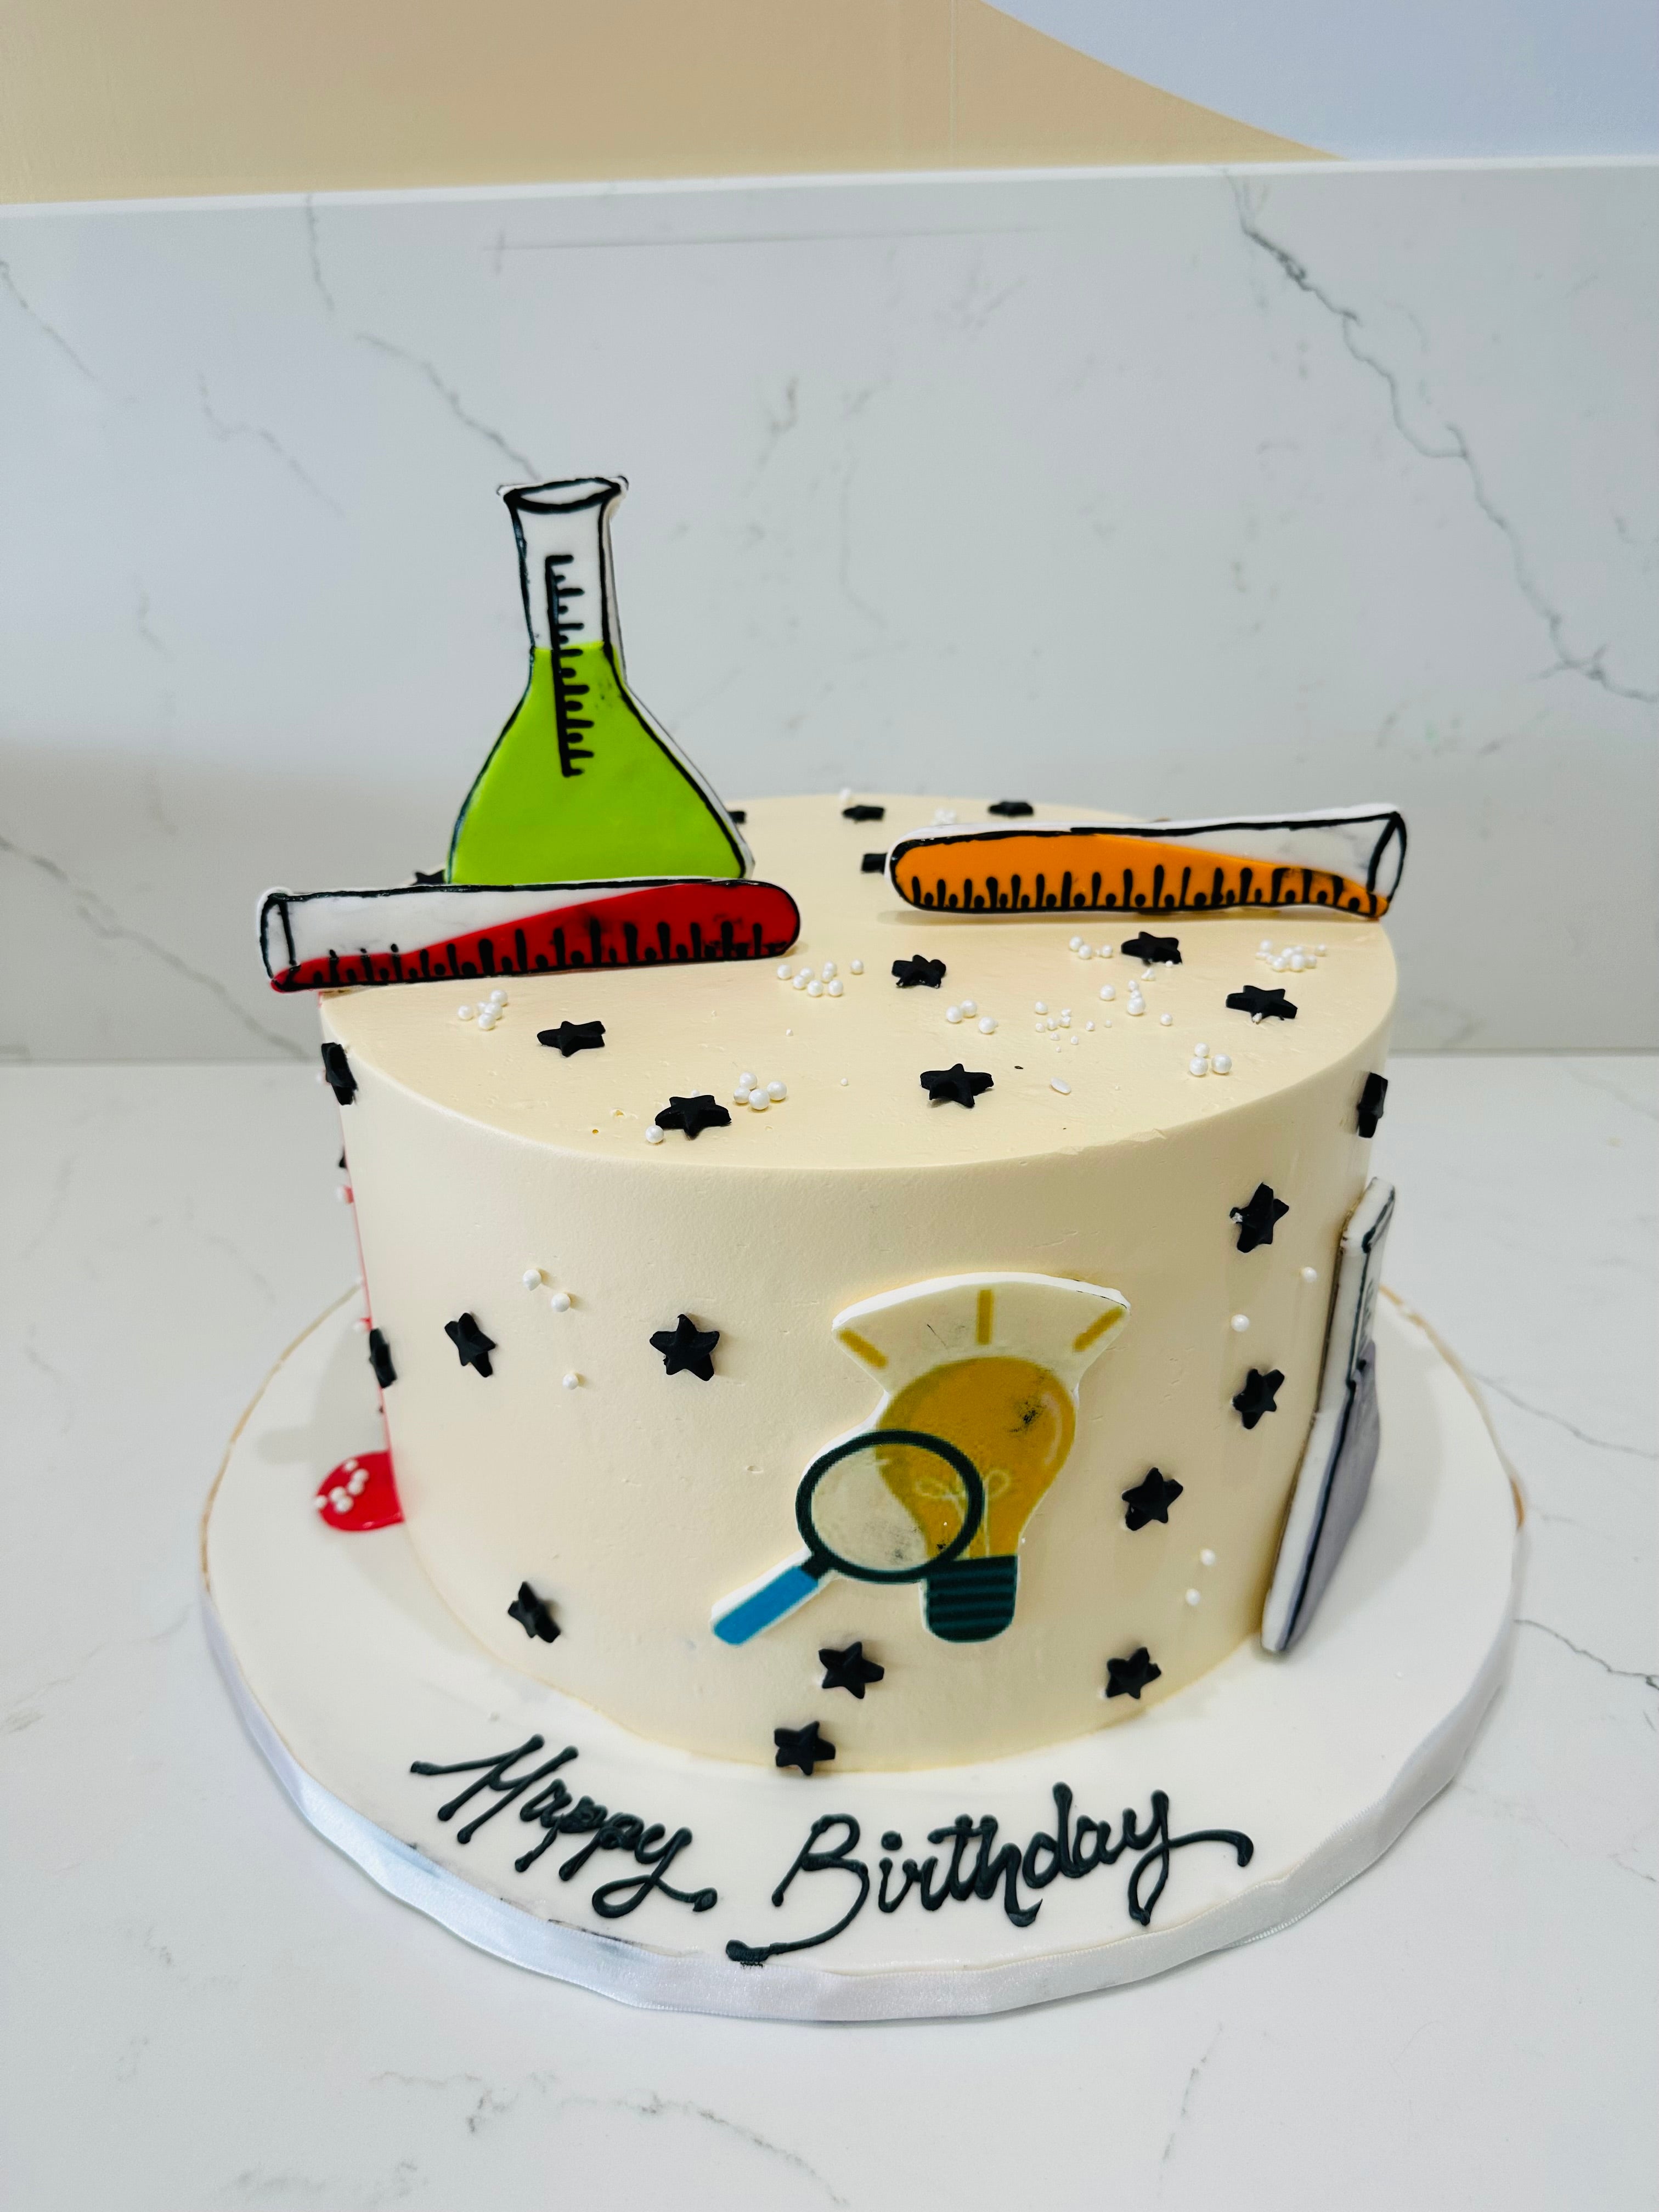 Decorated a cake for my lab with the chemical compounds of the prominent  flavors in the cake : r/chemistry